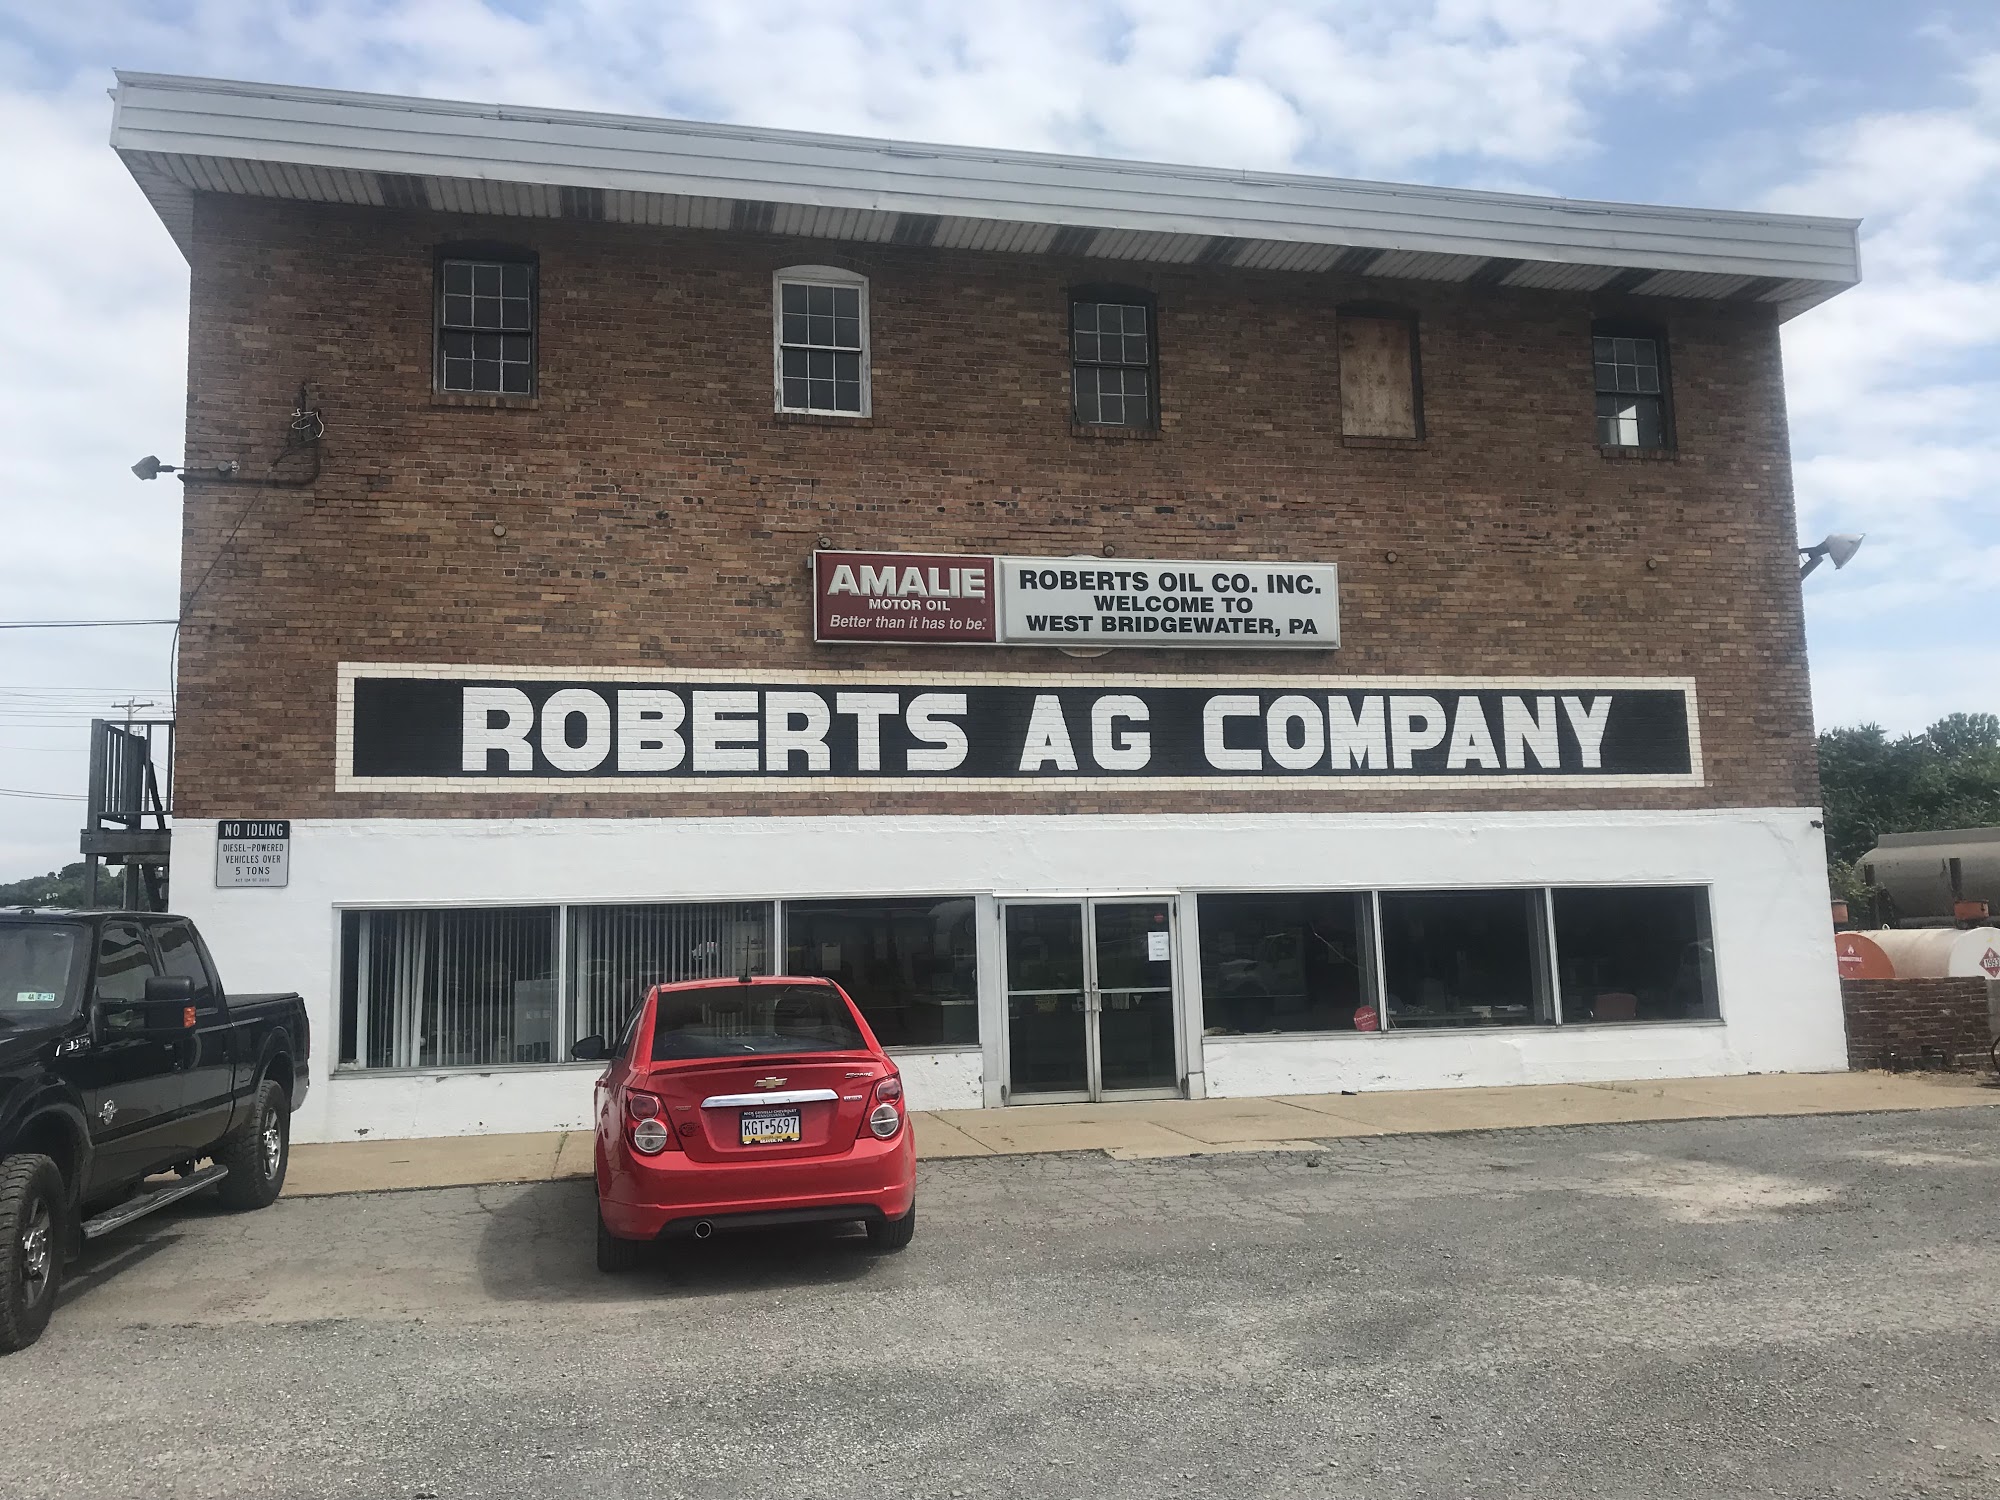 Roberts AG Oil Co